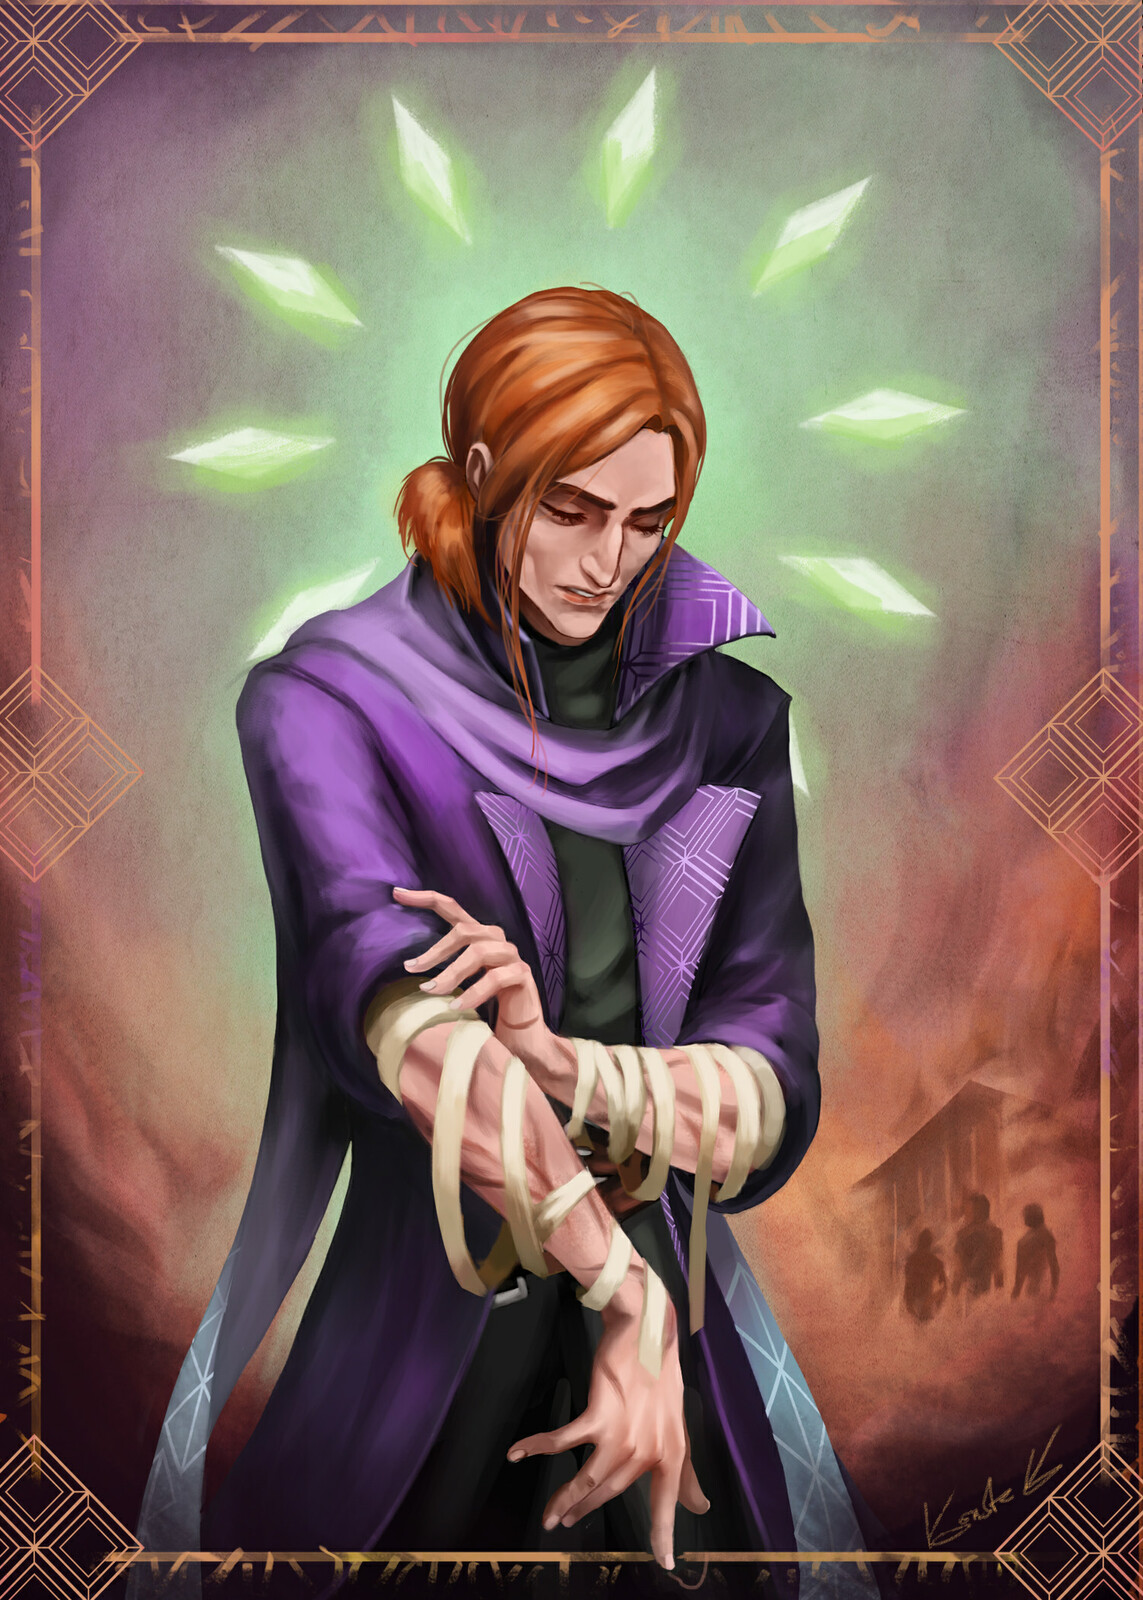 Caleb takes off the bandages on his arms to reveal the marks of his past